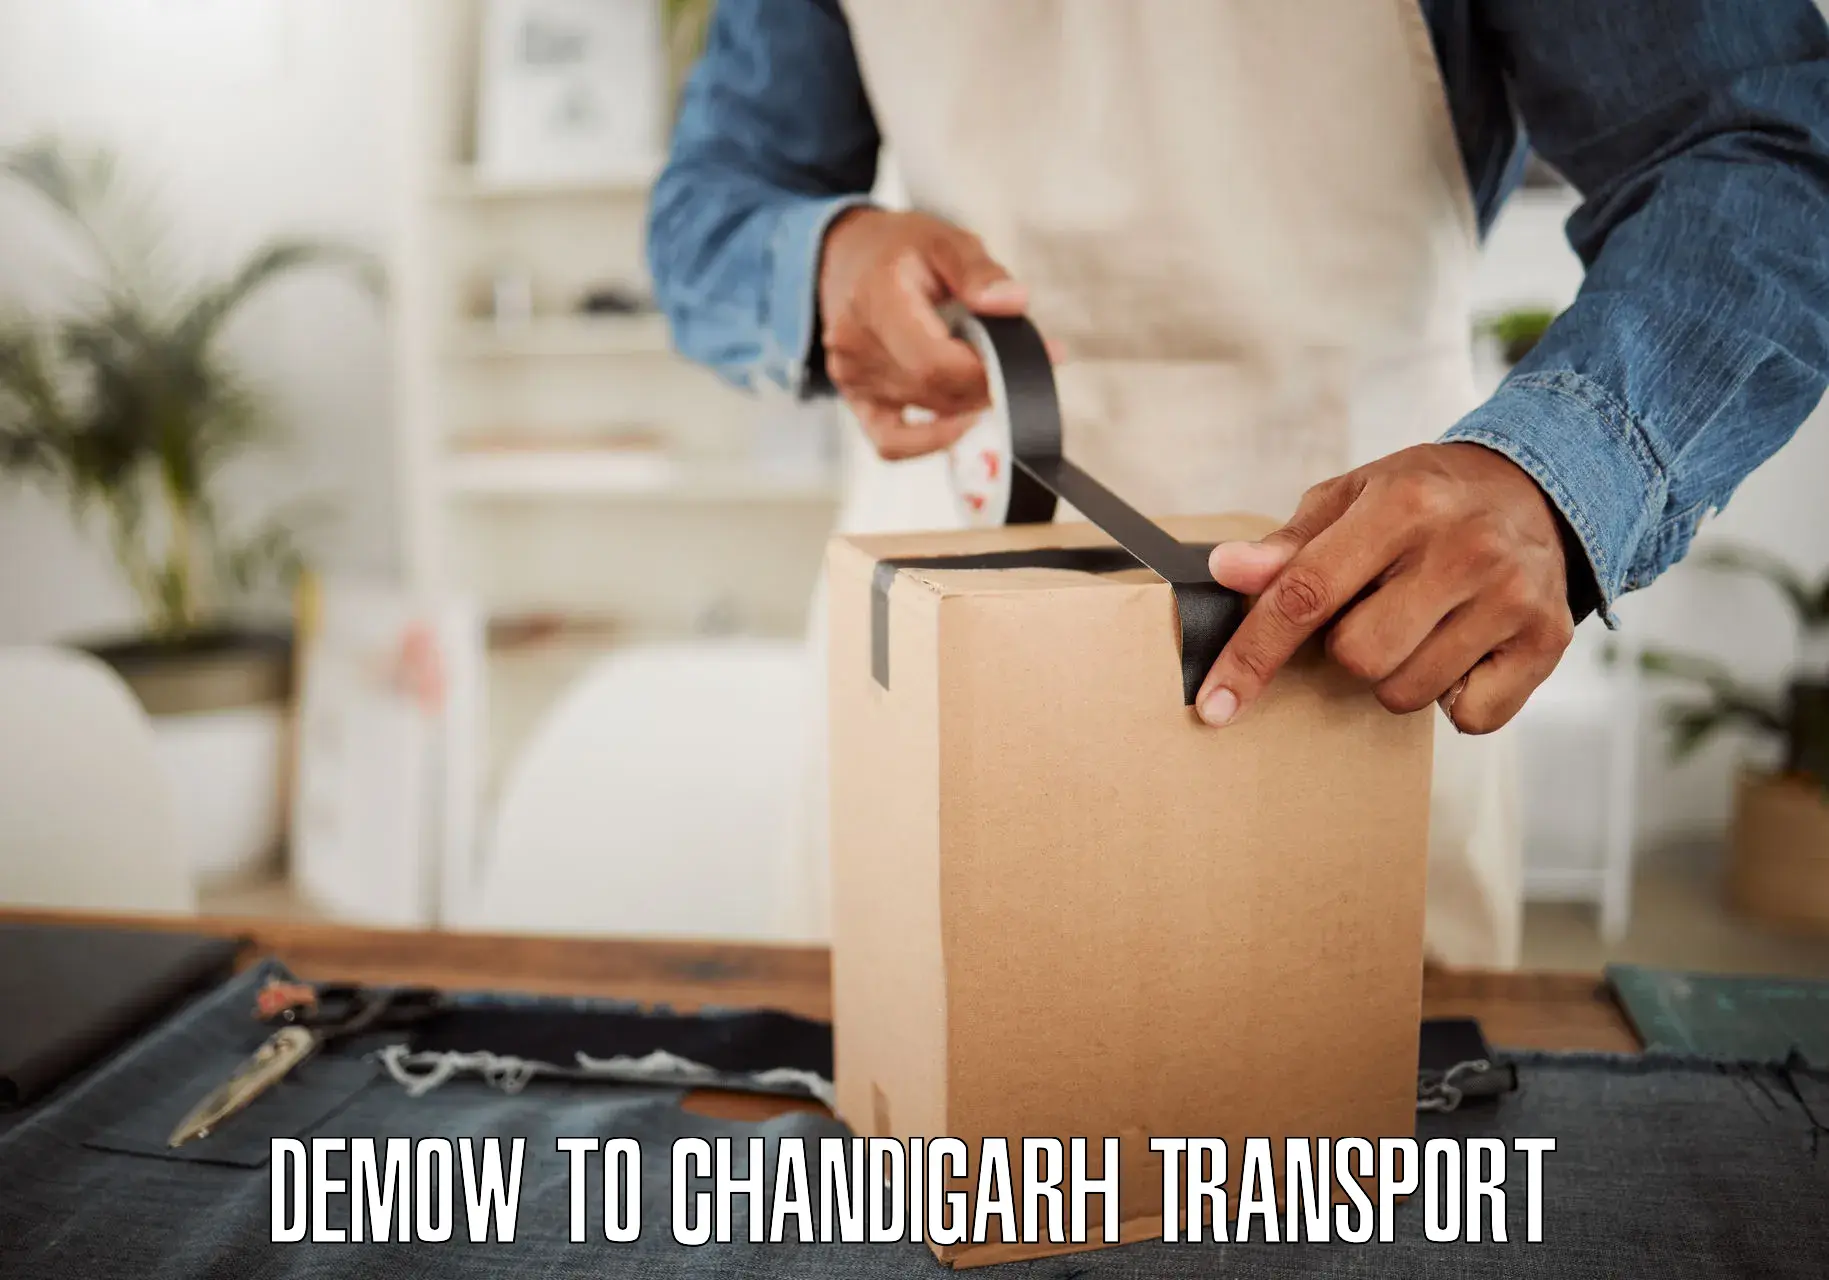 Pick up transport service Demow to Chandigarh